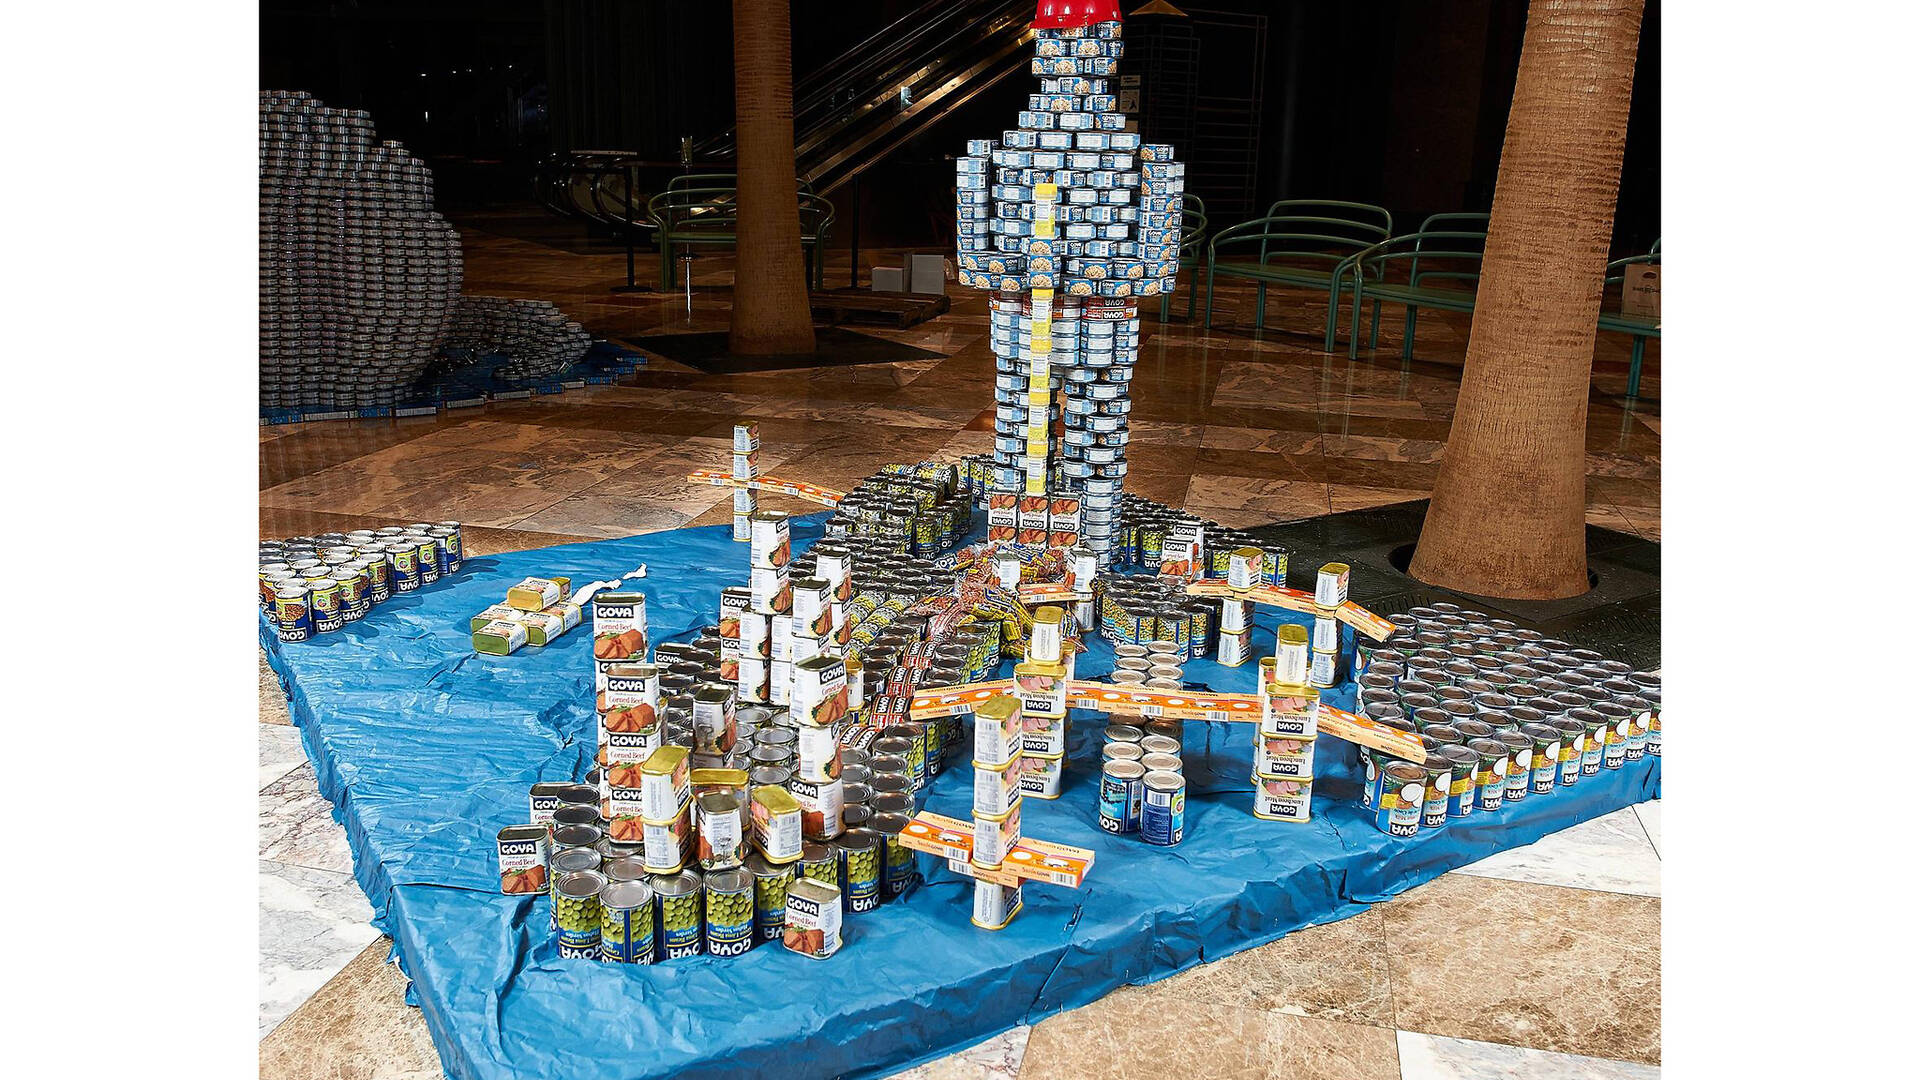 Canstruction is coming back to NYC's Brookfield Place this November